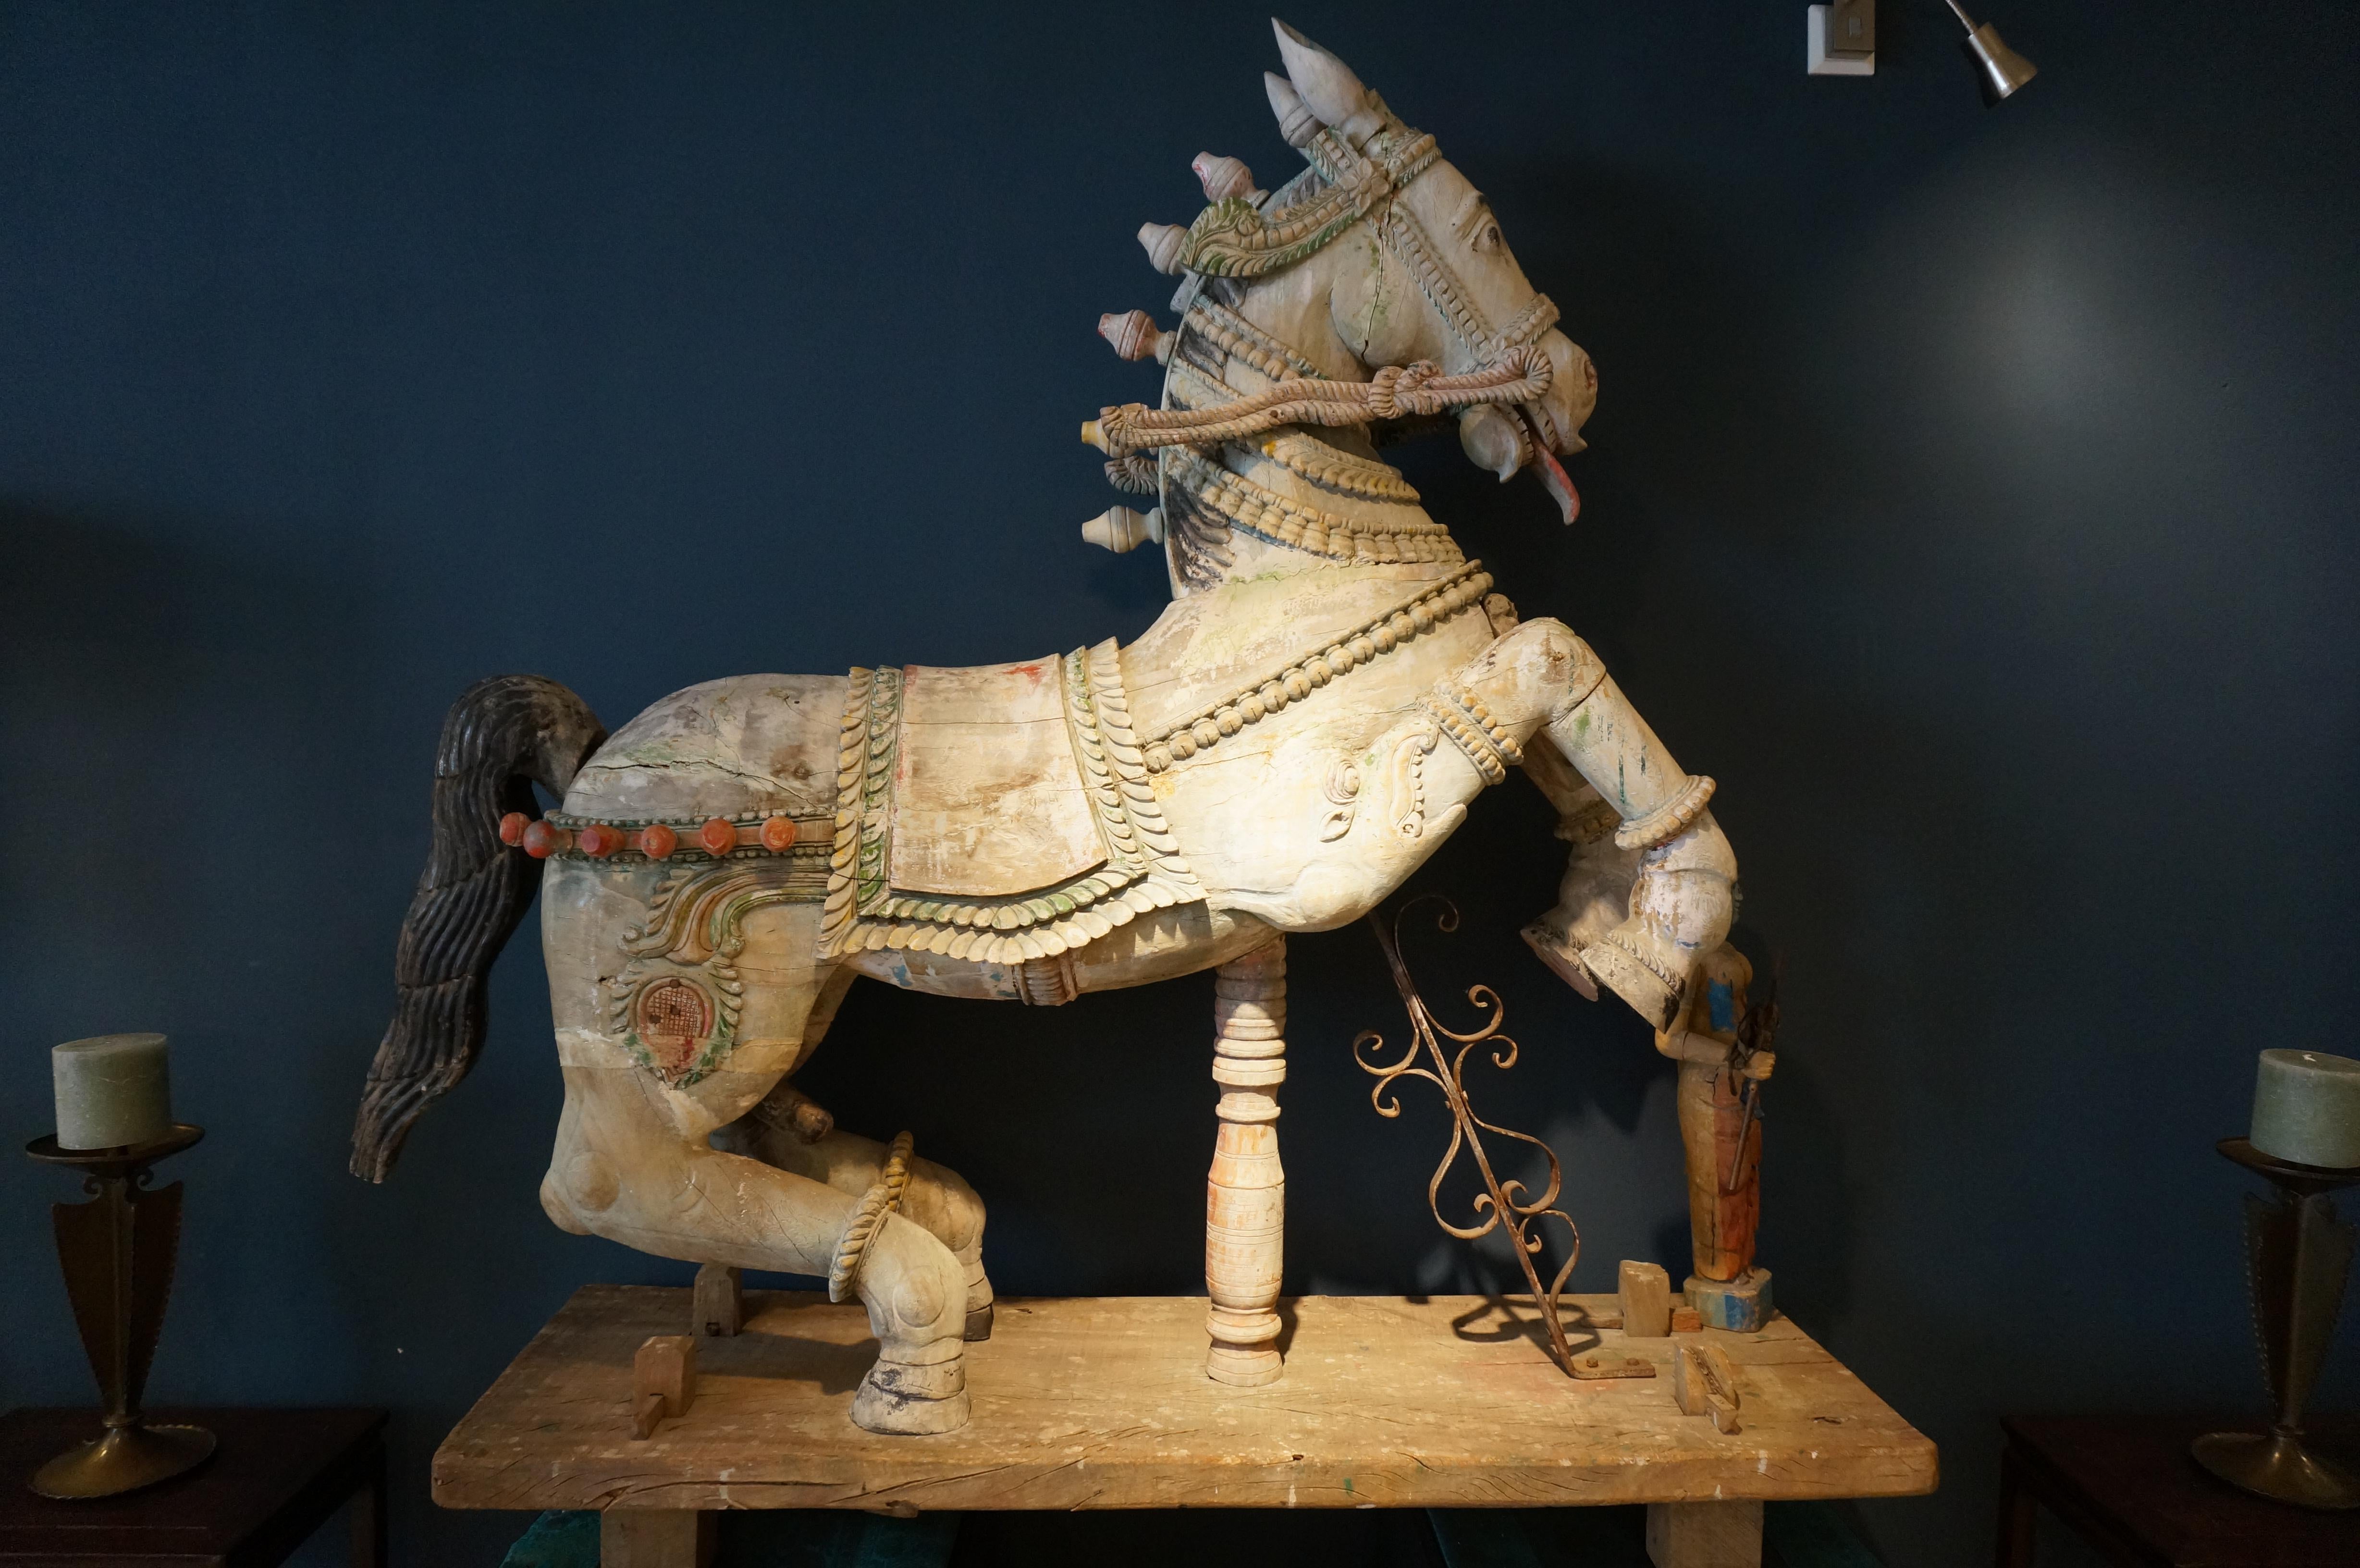 Large decorative Indian Hindu woodcarving depicting a horse with an attendant (possibly shiva), used for processions.

Polychrome woodcarving. In fair condition, some cracks in the wood and a restoration at the right hind leg (fracture